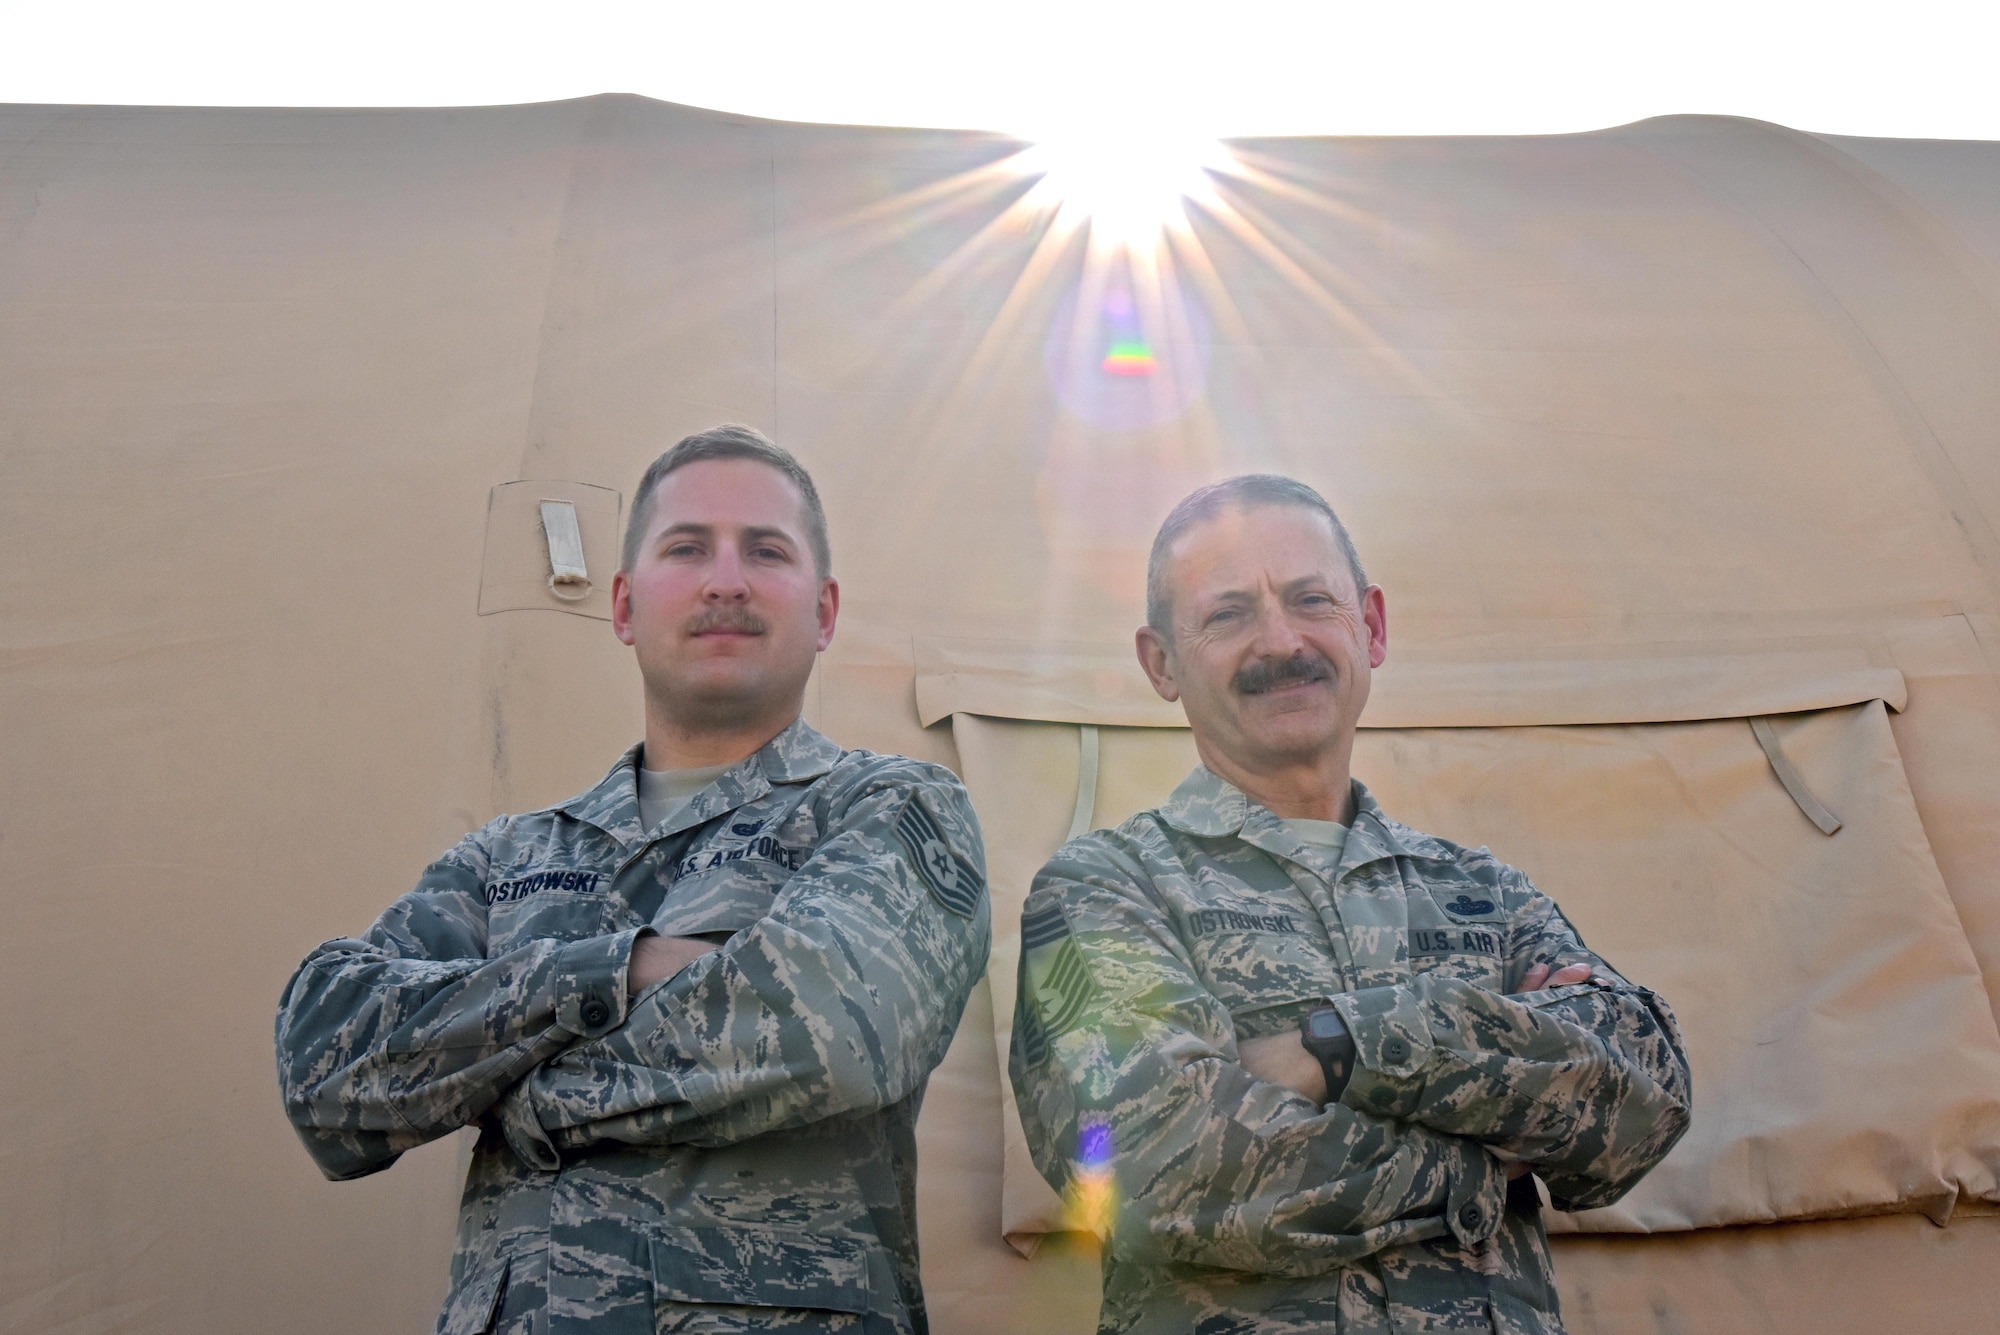 Tech. Sgt. Tyler Ostrowski, left, and Chief Master Sgt. Ted Ostrowski, Sr., stand outside of a tent at an undisclosed location in Southwest Asia, June 16, 2017. Ted and Tyler will spend Father's Day deployed with the 380th Air Expeditionary Wing in support of Combined Joint Task Force - Operation Inherent Resolve. (U.S. Air Force photo by Staff Sgt. Marjorie A. Bowlden)